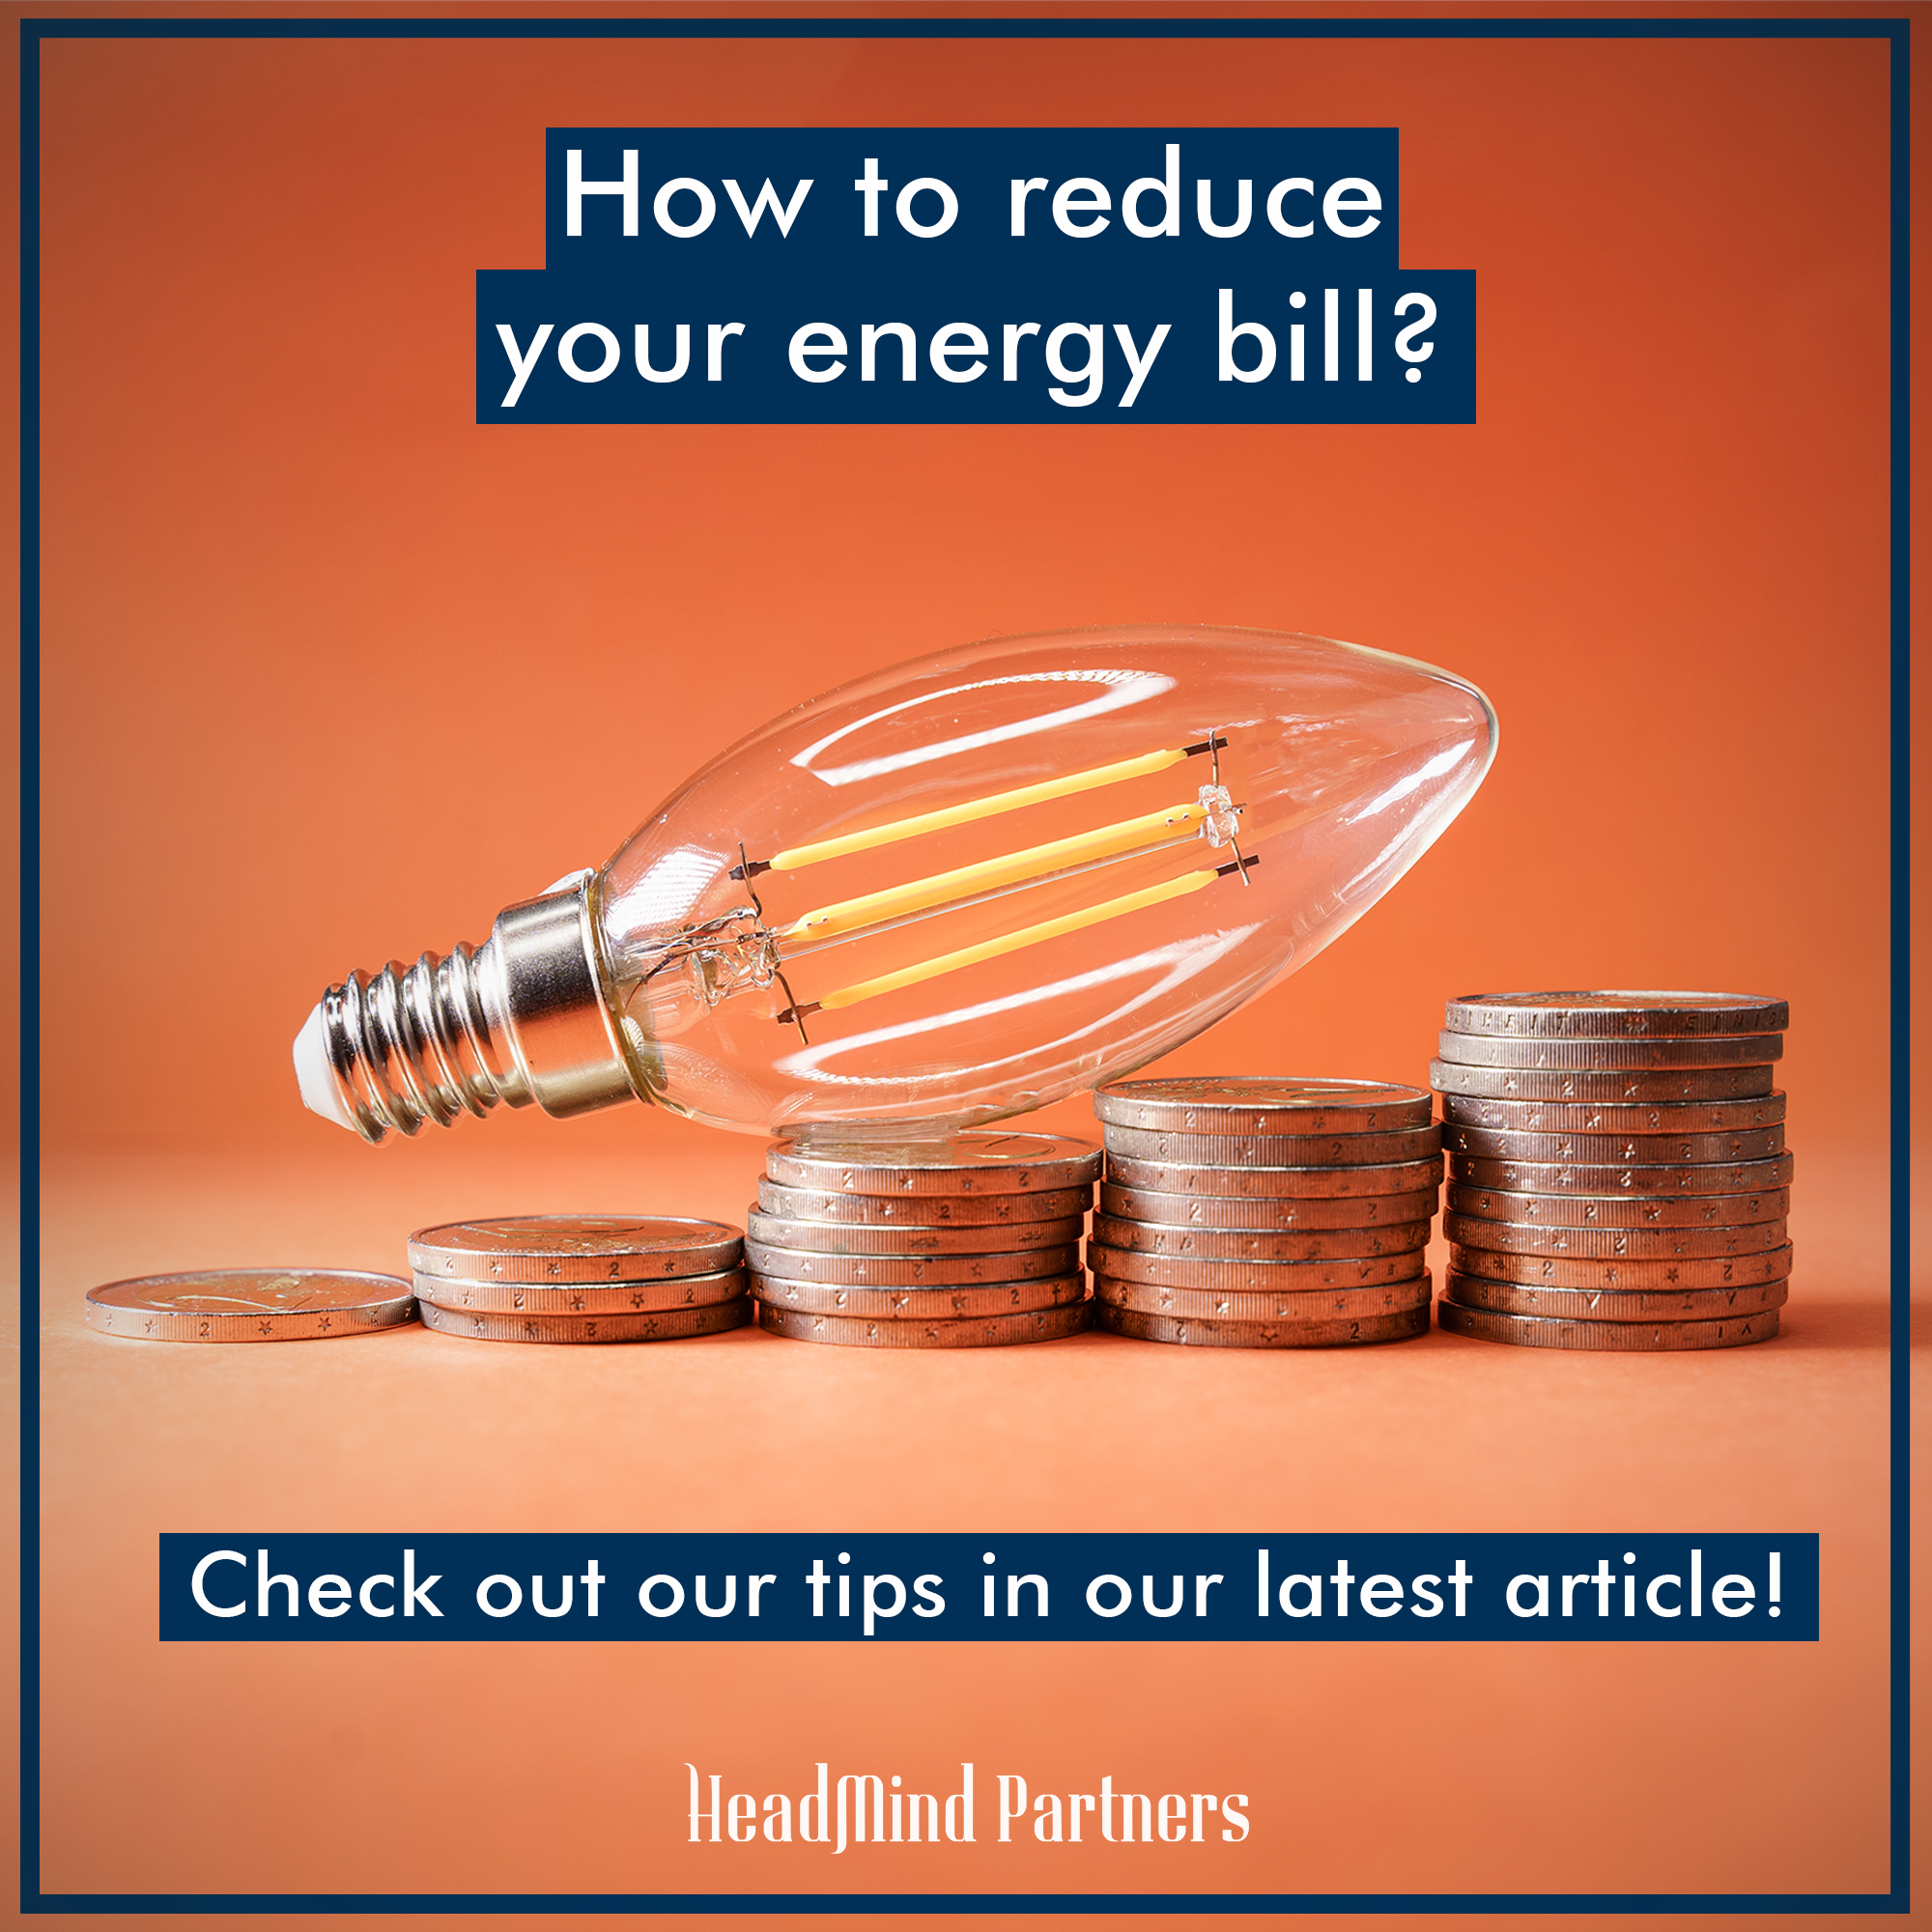 Let’s dismantle the energy bill